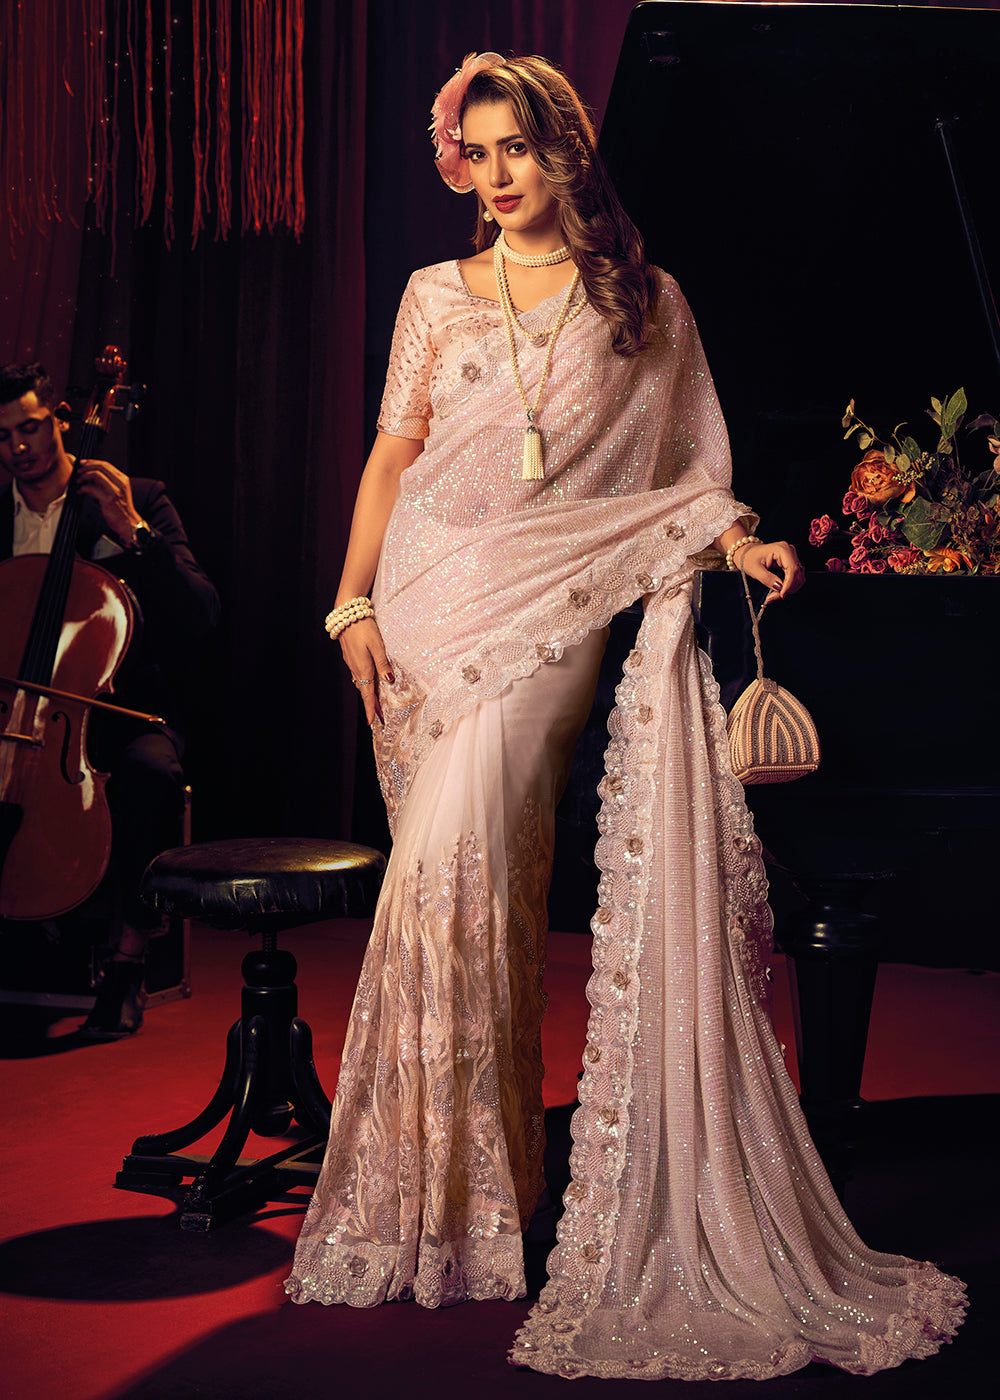 Shop Now Bridal Party Pretty Peach Premium Net Classic Saree from Empress Clothing in USA, UK, Canada & Worldwide. 